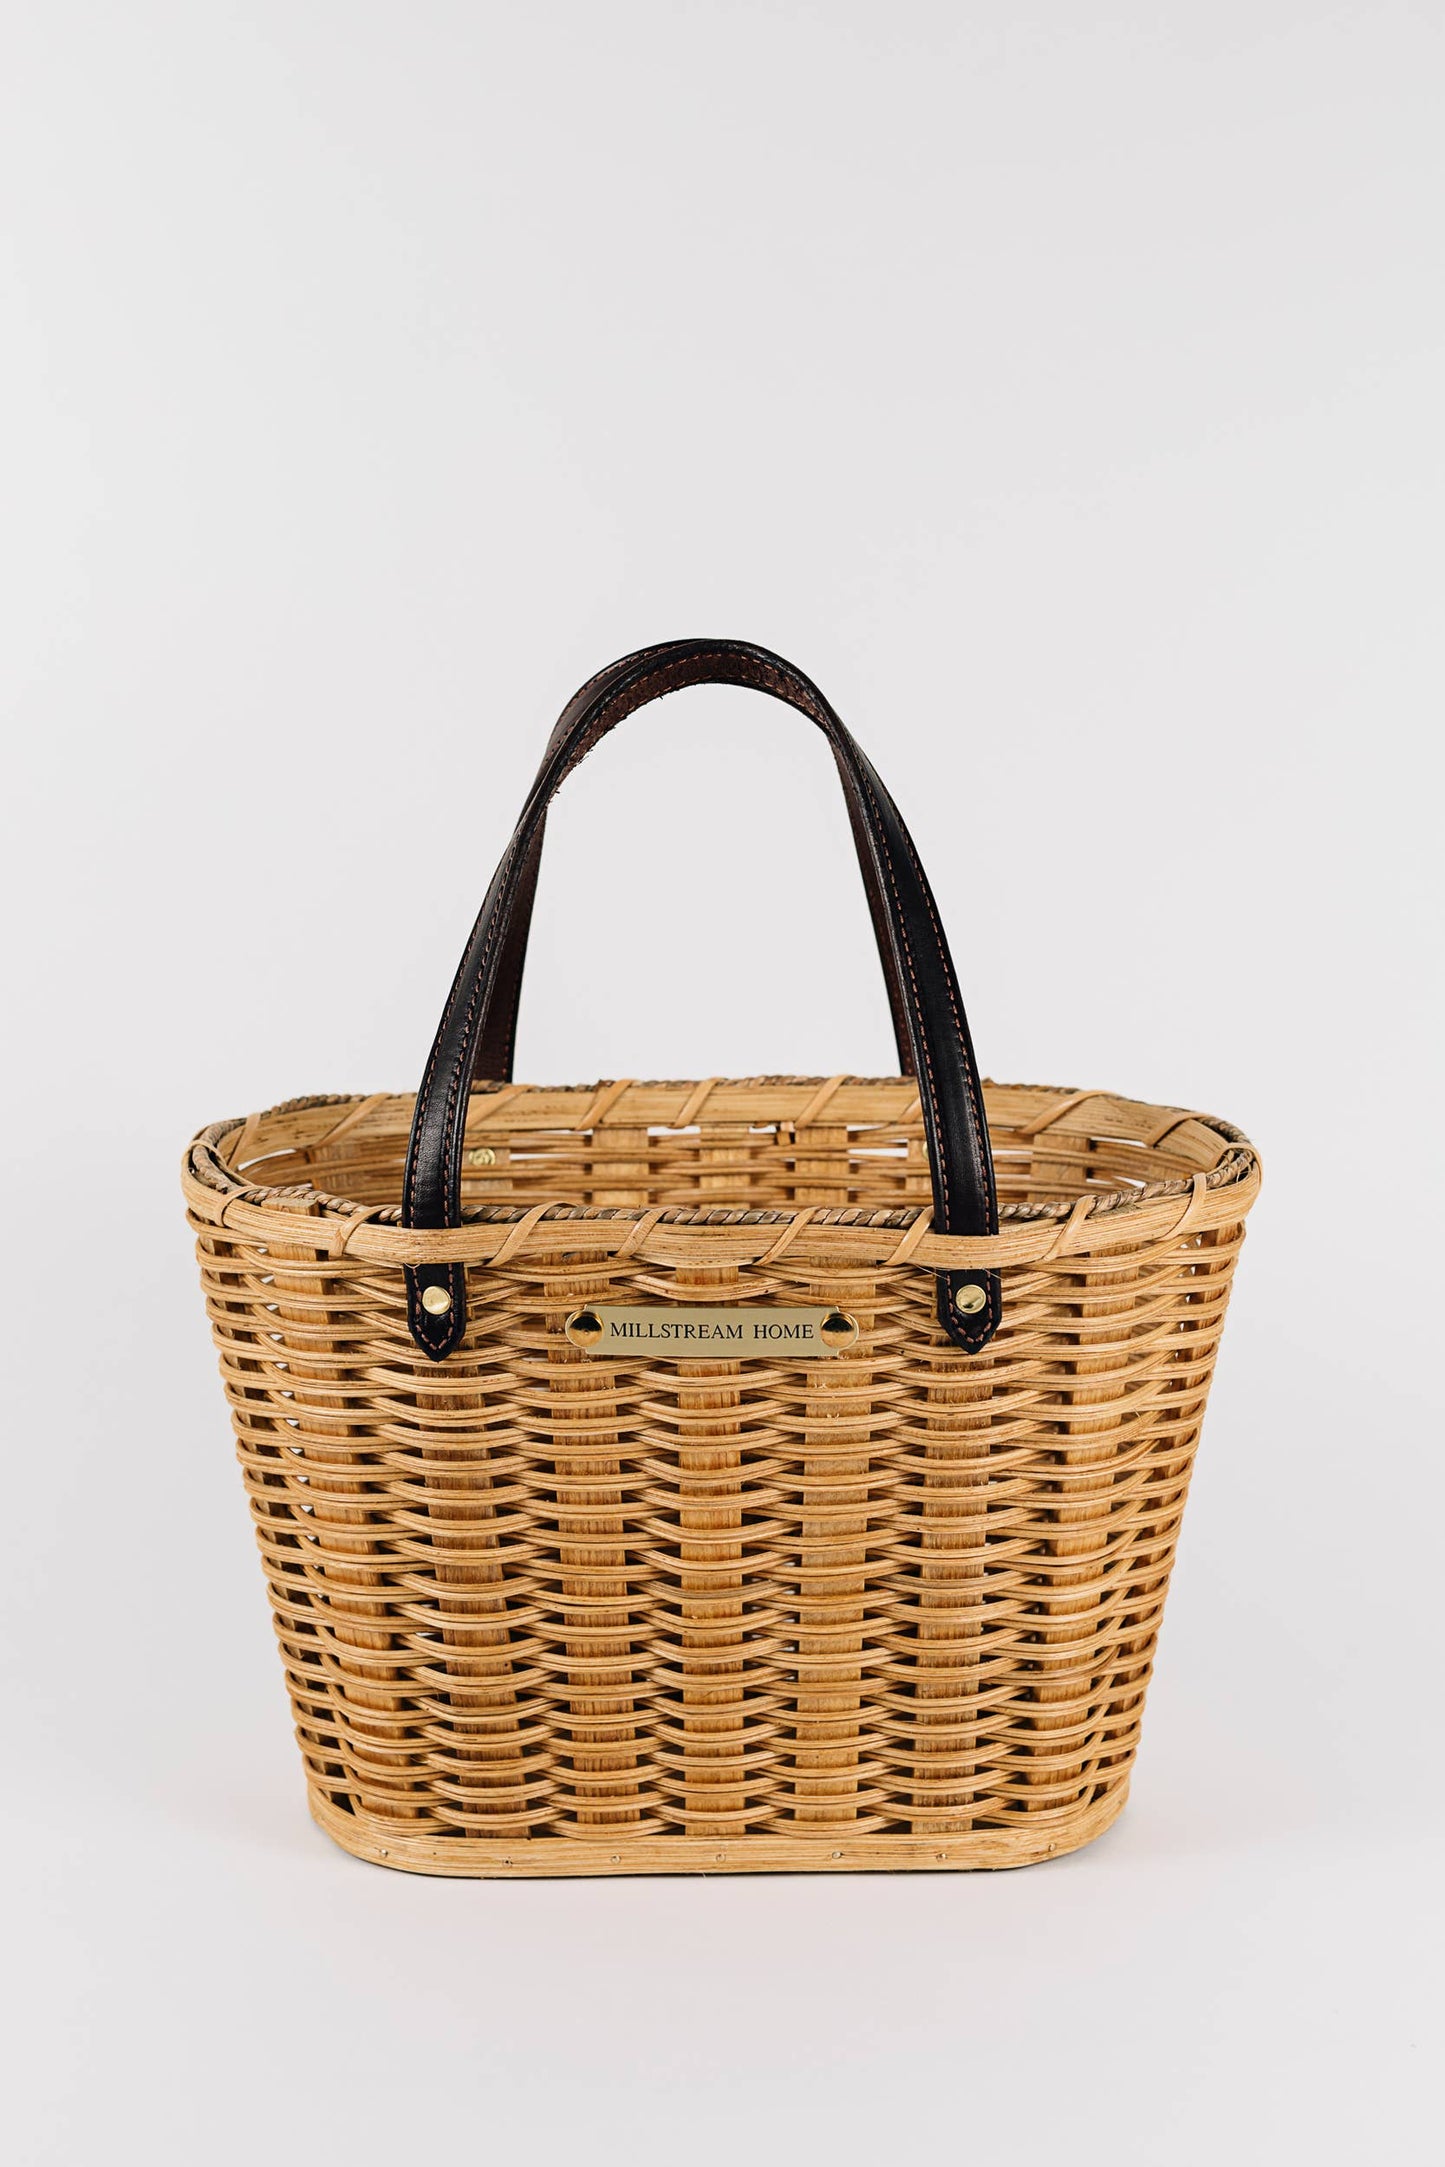 handwoven light colored market basket with leather handles. 